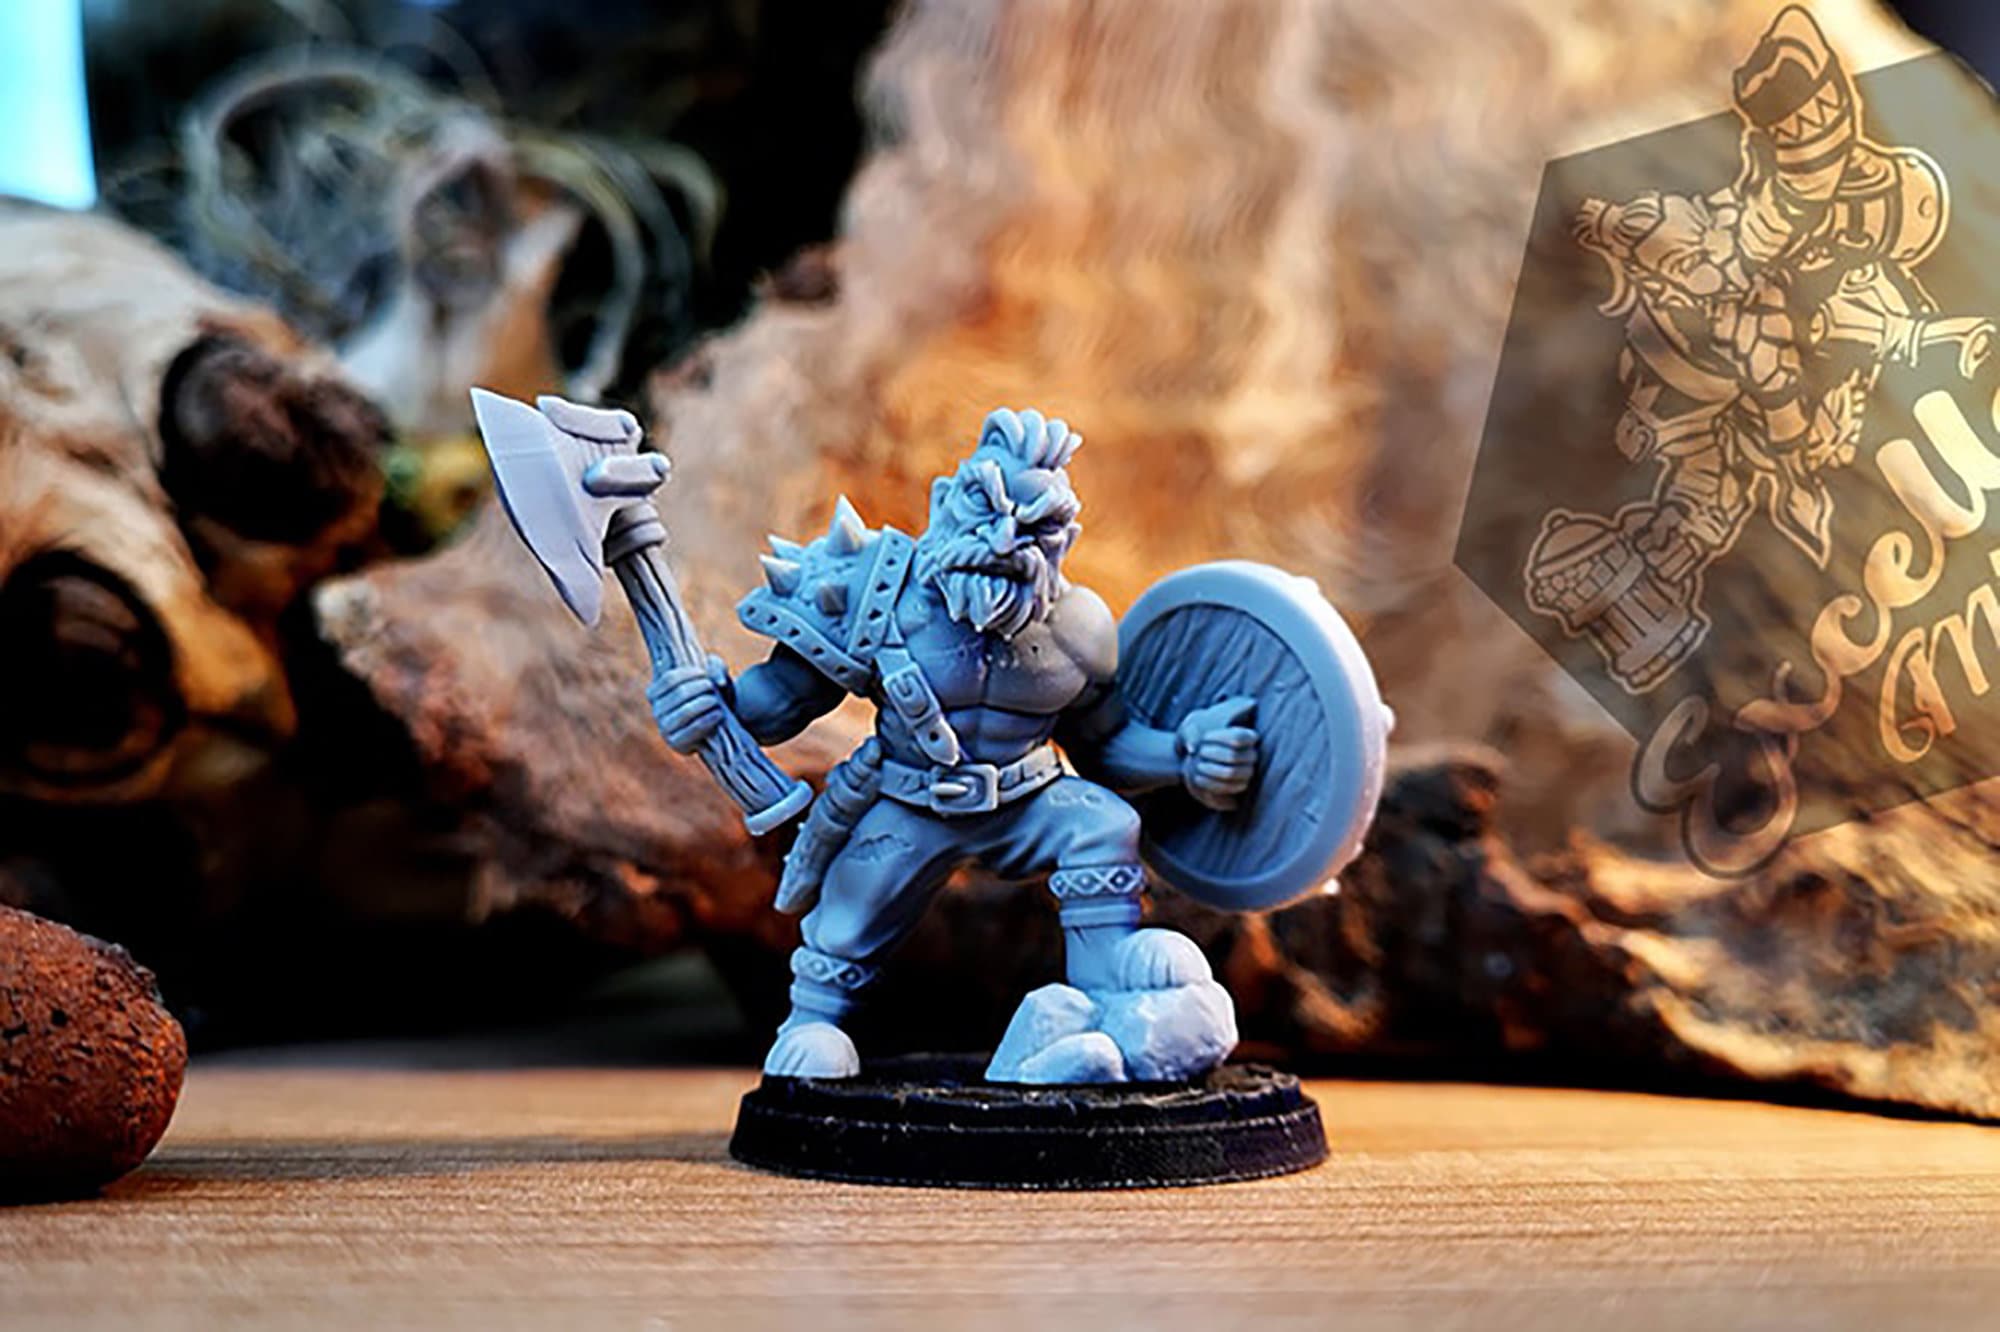 DWARF FIGHTER (M) "Doran Grimlook" | Dungeons and Dragons | DnD | Pathfinder | Tabletop | RPG | Hero Size | 28 mm-Role Playing Miniatures